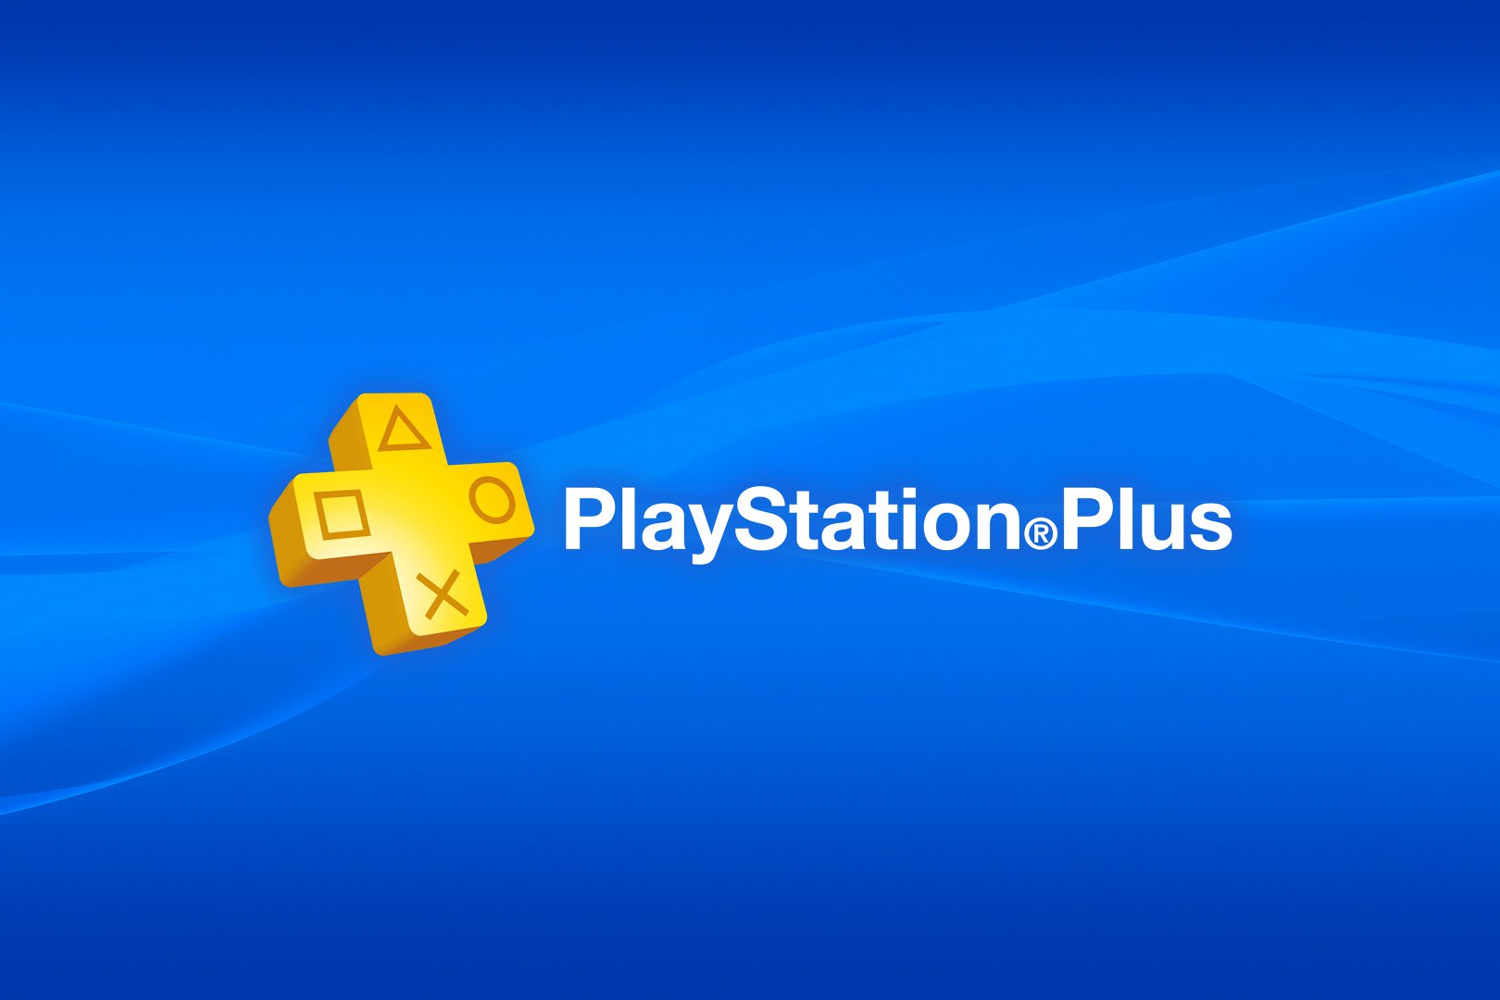 PS4 - How To Get Playstation Plus FREE For 2 Days *Playstation Plus 2020* 